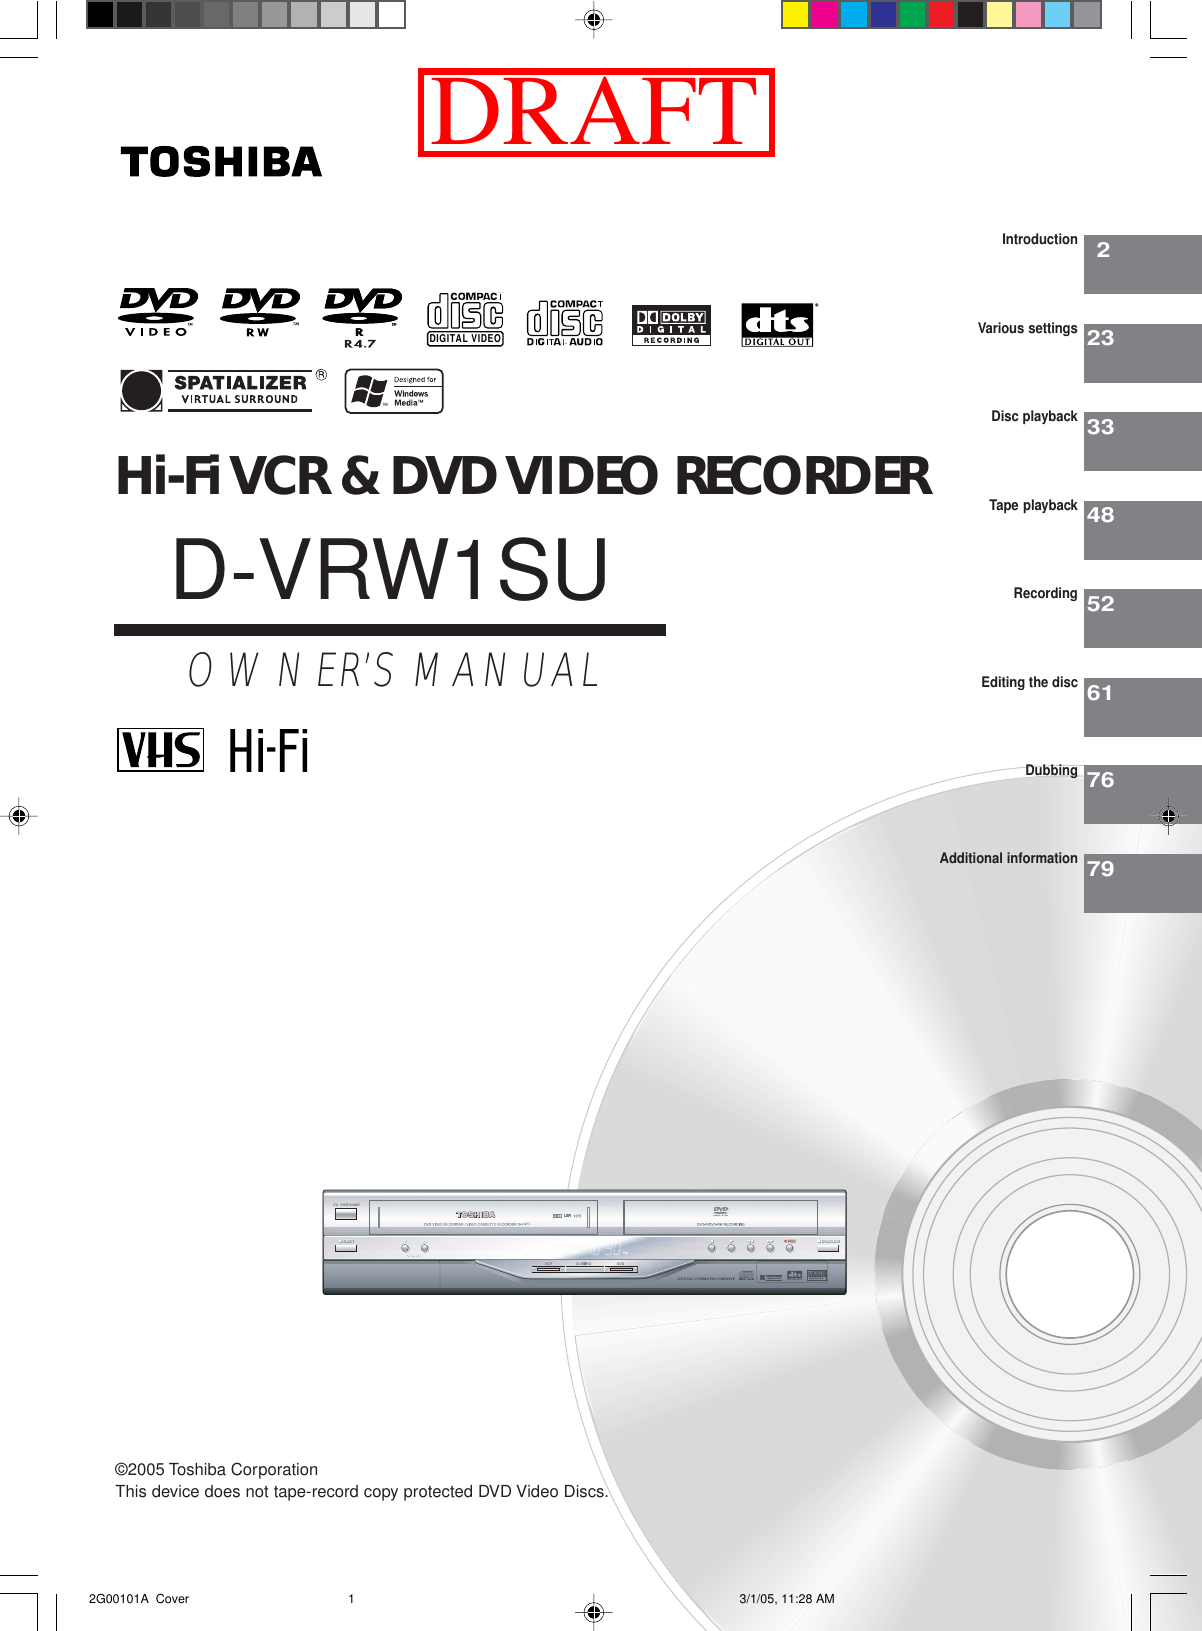 Hi-Fi VCR &amp; DVD VIDEO RECORDERD-VRW1SUOWNER’S MANUAL22333485261IntroductionVarious settingsDisc playbackTape playbackRecordingEditing the discDIGITAL VIDEO©2005 Toshiba Corporation7679DubbingAdditional informationThis device does not tape-record copy protected DVD Video Discs.W1 2G00101A  Cover 3/1/05, 11:28 AM1DRAFT